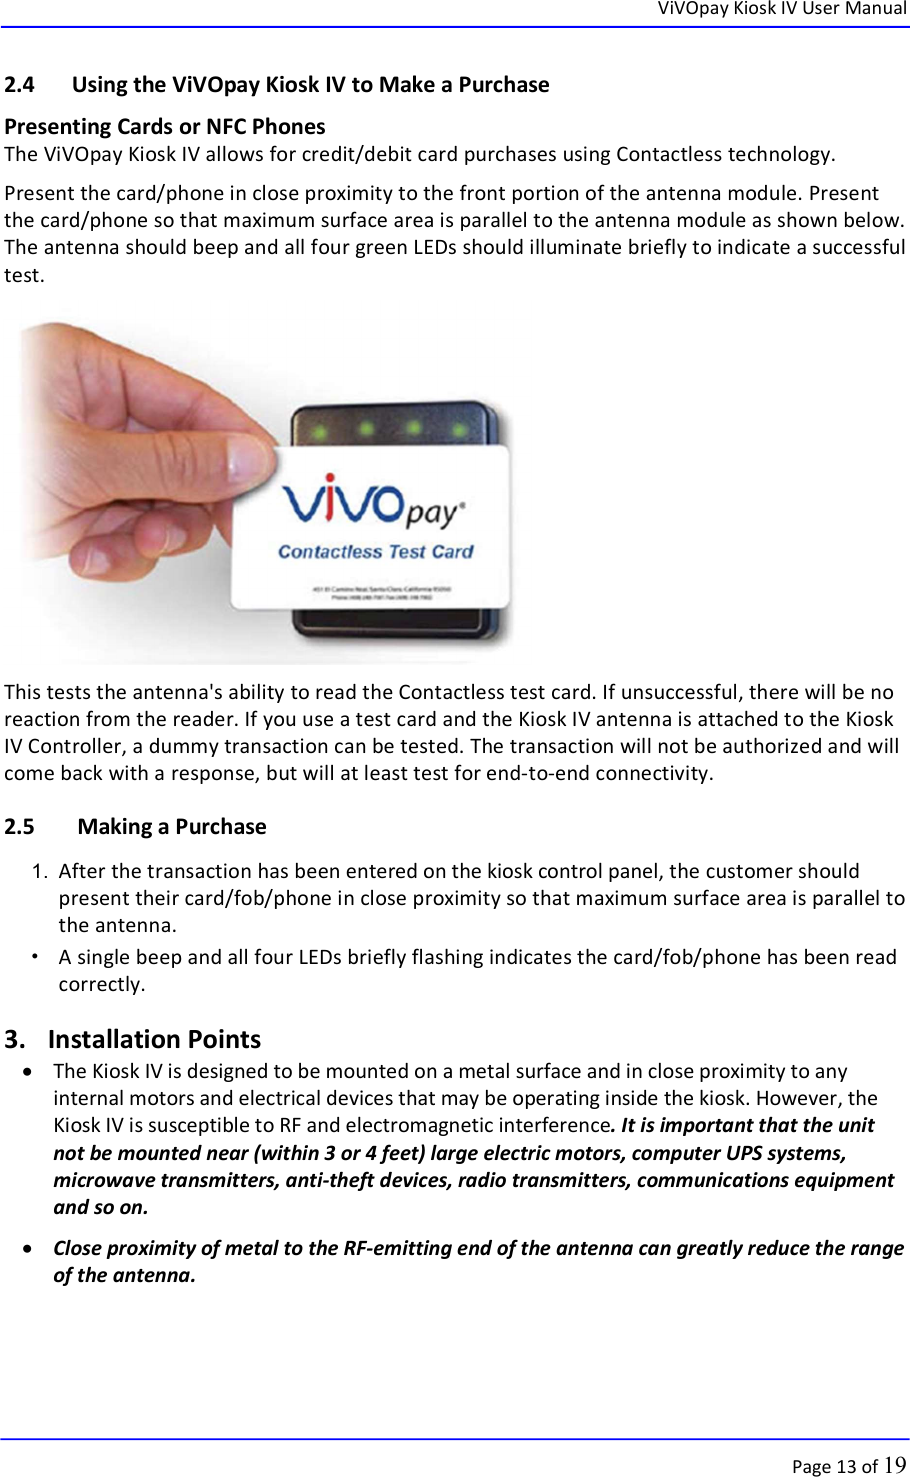  ViVOpay Kiosk IV User Manual      Page 13 of 19 2.4 Using the ViVOpay Kiosk IV to Make a Purchase Presenting Cards or NFC Phones The ViVOpay Kiosk IV allows for credit/debit card purchases using Contactless technology. Present the card/phone in close proximity to the front portion of the antenna module. Present the card/phone so that maximum surface area is parallel to the antenna module as shown below. The antenna should beep and all four green LEDs should illuminate briefly to indicate a successful test.  This tests the antenna&apos;s ability to read the Contactless test card. If unsuccessful, there will be no reaction from the reader. If you use a test card and the Kiosk IV antenna is attached to the Kiosk IV Controller, a dummy transaction can be tested. The transaction will not be authorized and will come back with a response, but will at least test for end-to-end connectivity.  2.5  Making a Purchase 1.  After the transaction has been entered on the kiosk control panel, the customer should present their card/fob/phone in close proximity so that maximum surface area is parallel to the antenna.  •   A single beep and all four LEDs briefly flashing indicates the card/fob/phone has been read correctly. 3. Installation Points  The Kiosk IV is designed to be mounted on a metal surface and in close proximity to any internal motors and electrical devices that may be operating inside the kiosk. However, the Kiosk IV is susceptible to RF and electromagnetic interference. It is important that the unit not be mounted near (within 3 or 4 feet) large electric motors, computer UPS systems, microwave transmitters, anti-theft devices, radio transmitters, communications equipment and so on.  Close proximity of metal to the RF-emitting end of the antenna can greatly reduce the range of the antenna.  